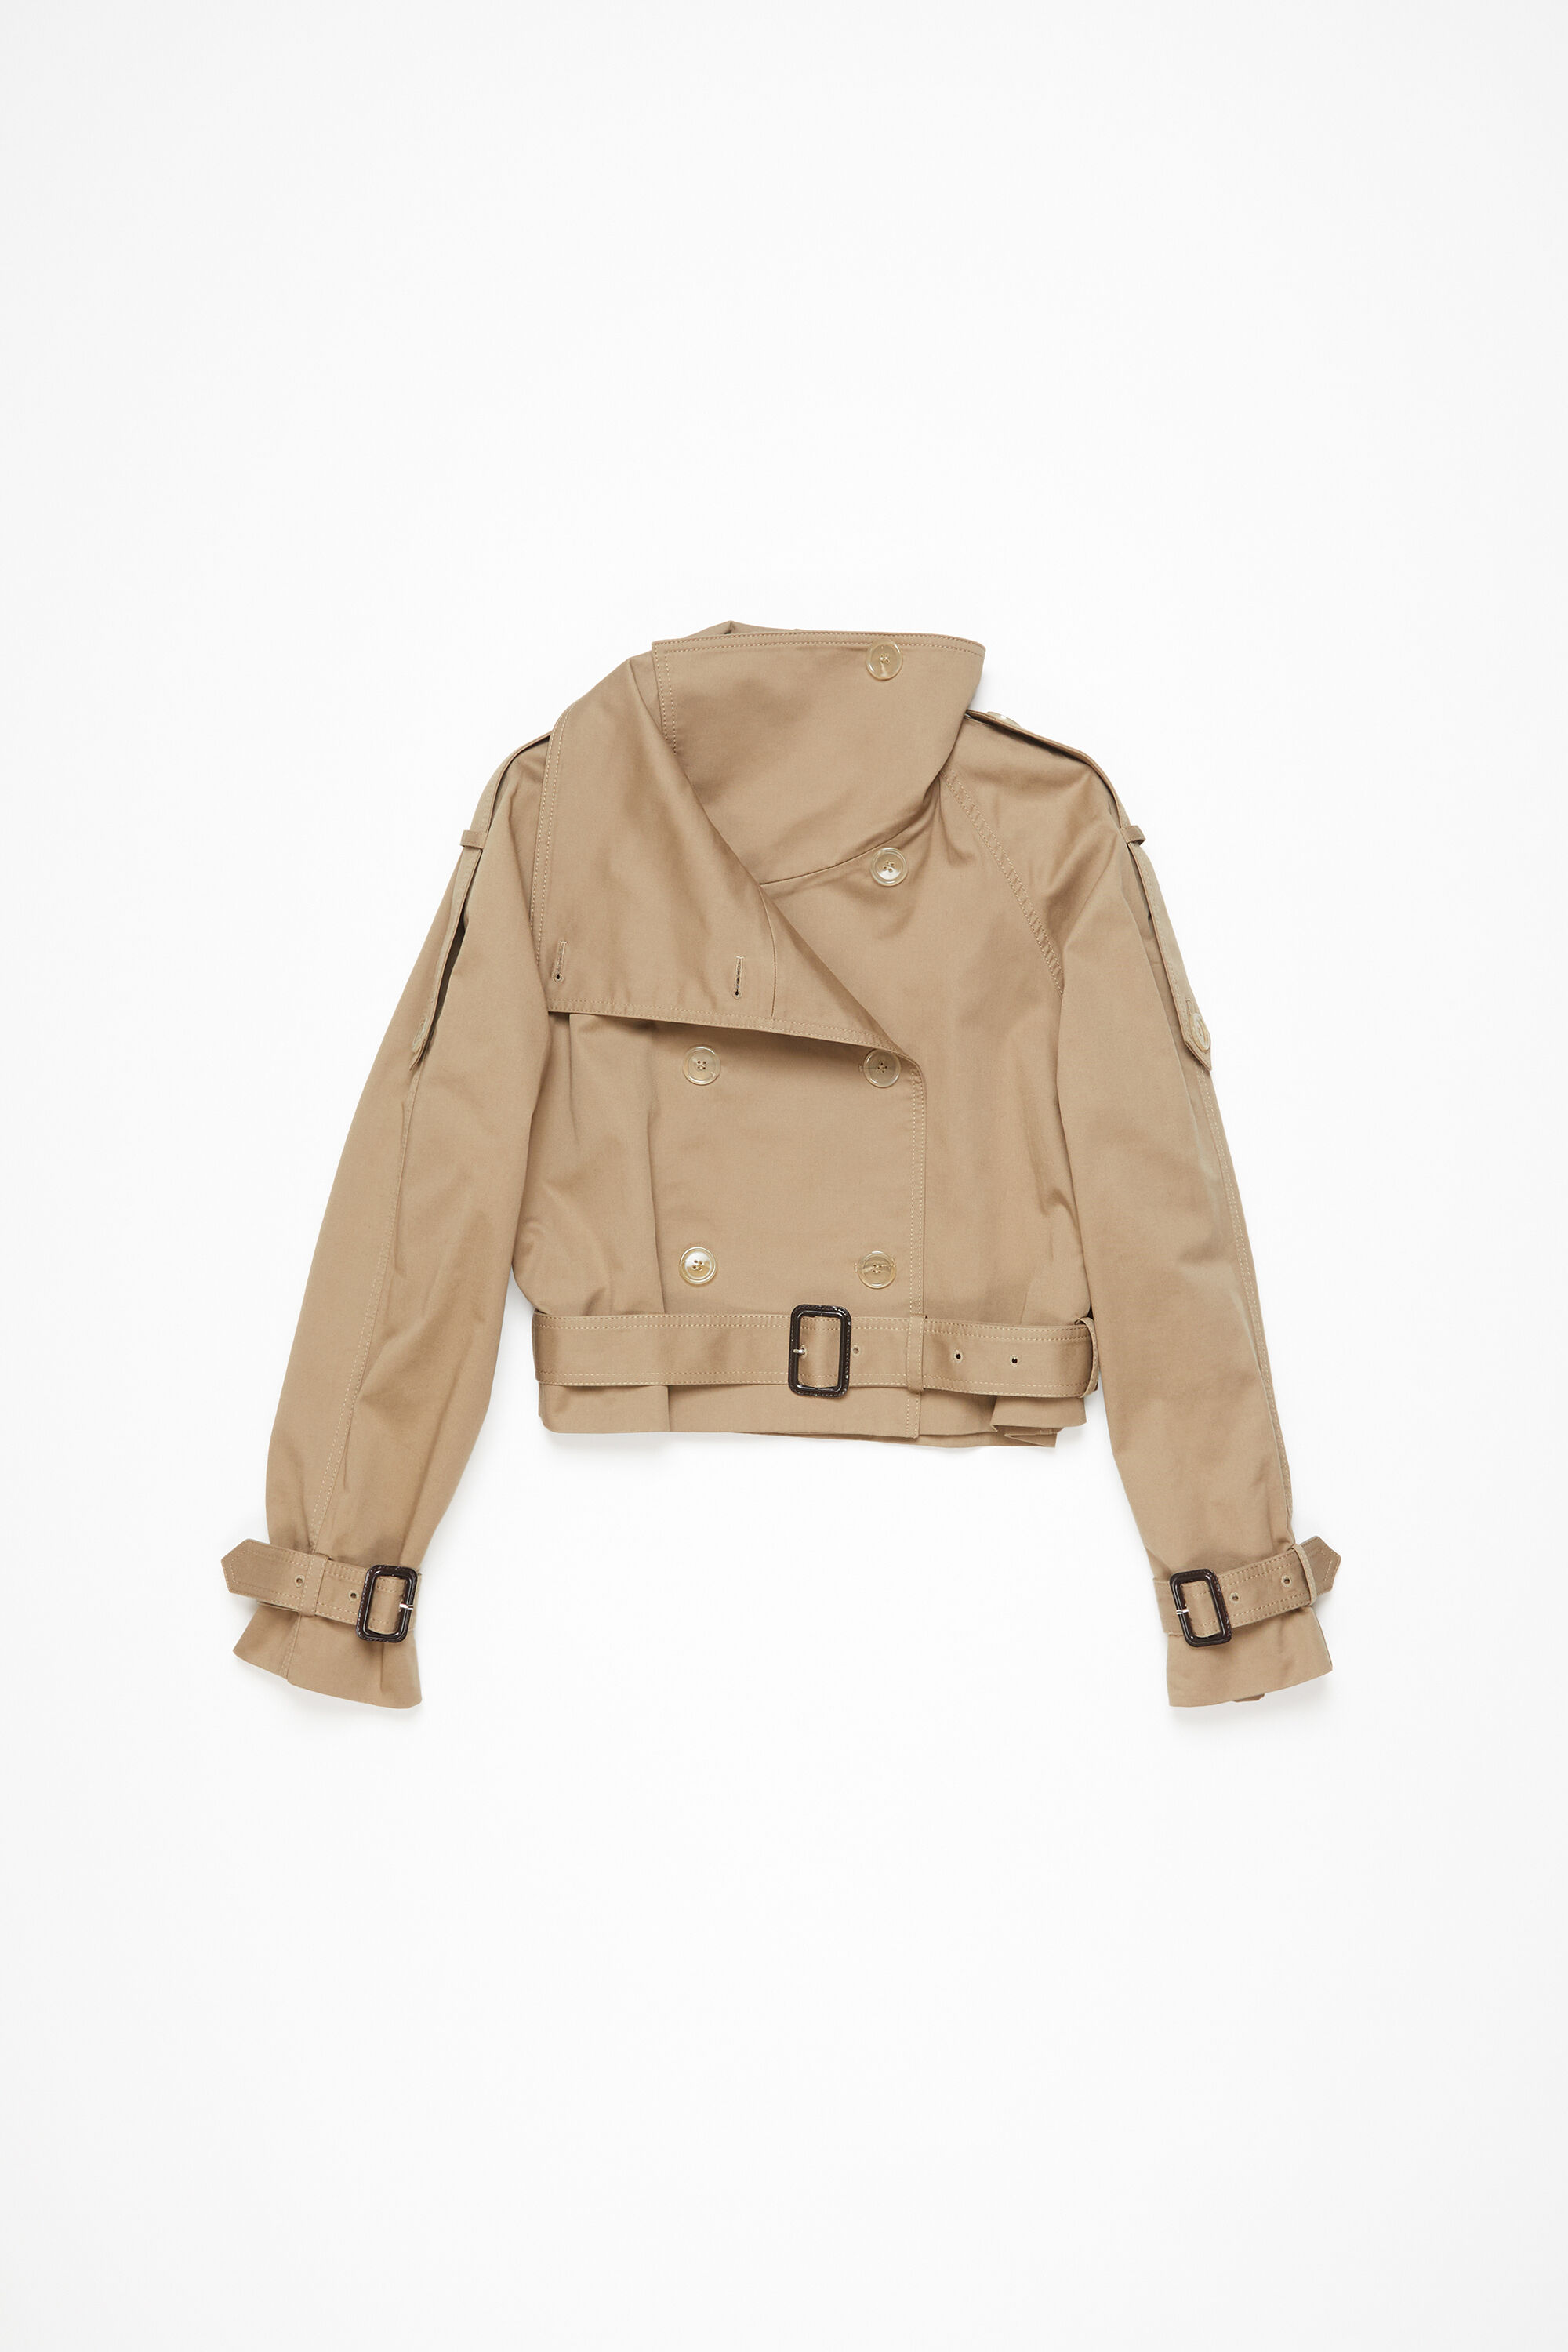 Acne Studios - Double-breasted trench jacket - Cold beige